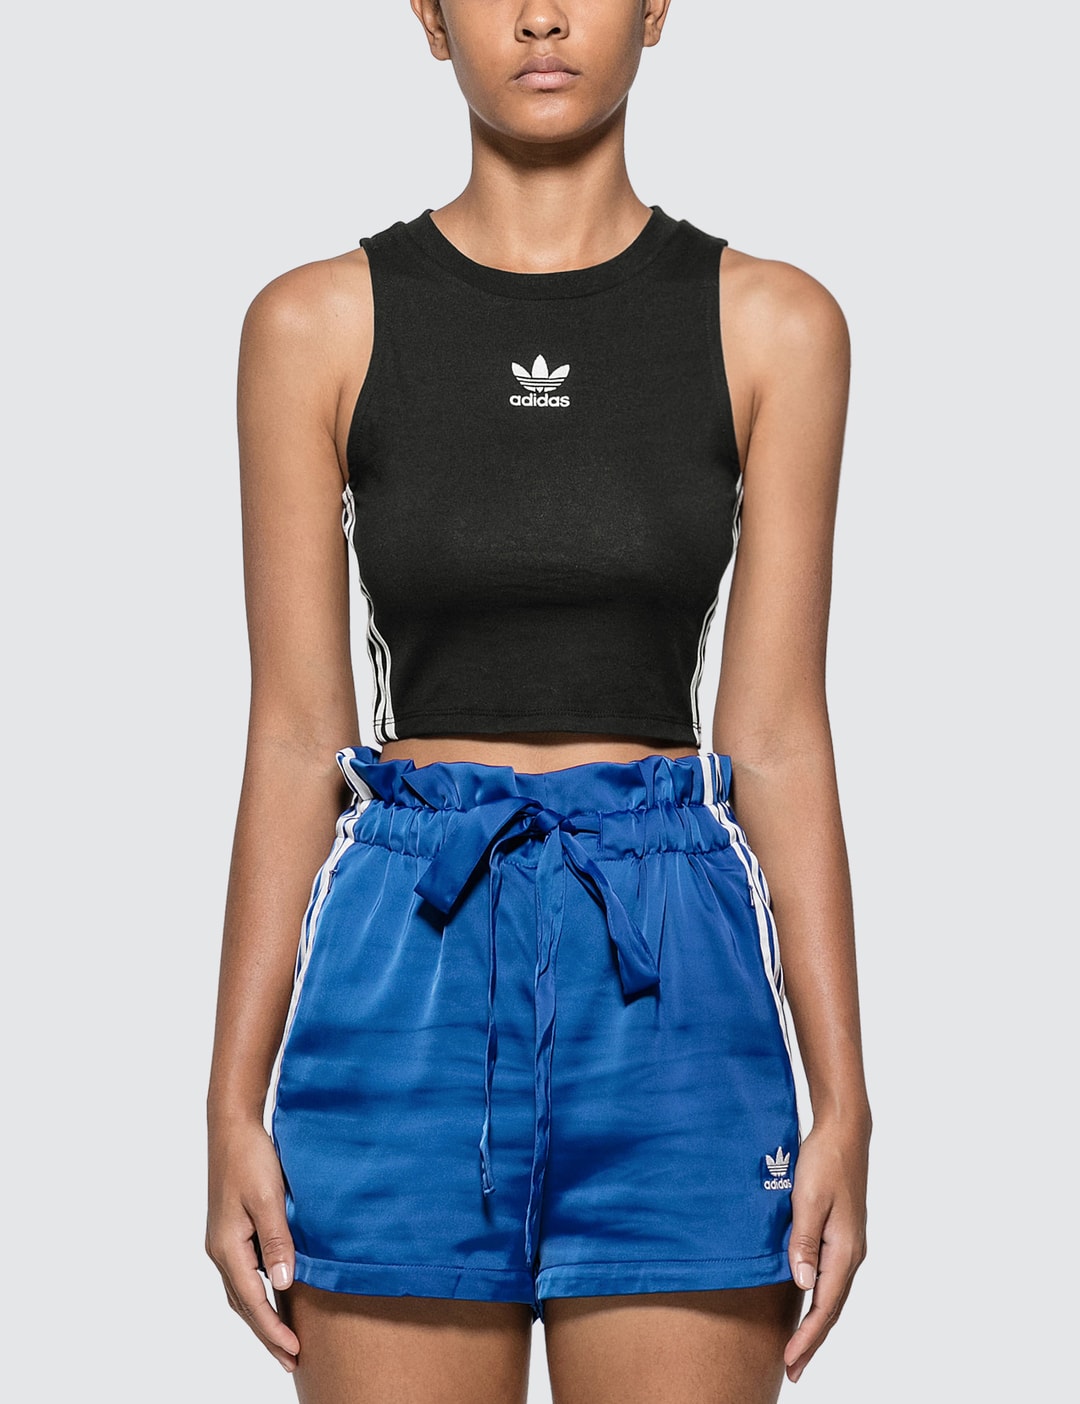 Adidas Originals - Crop Tank | HBX - Globally Curated Fashion and ...